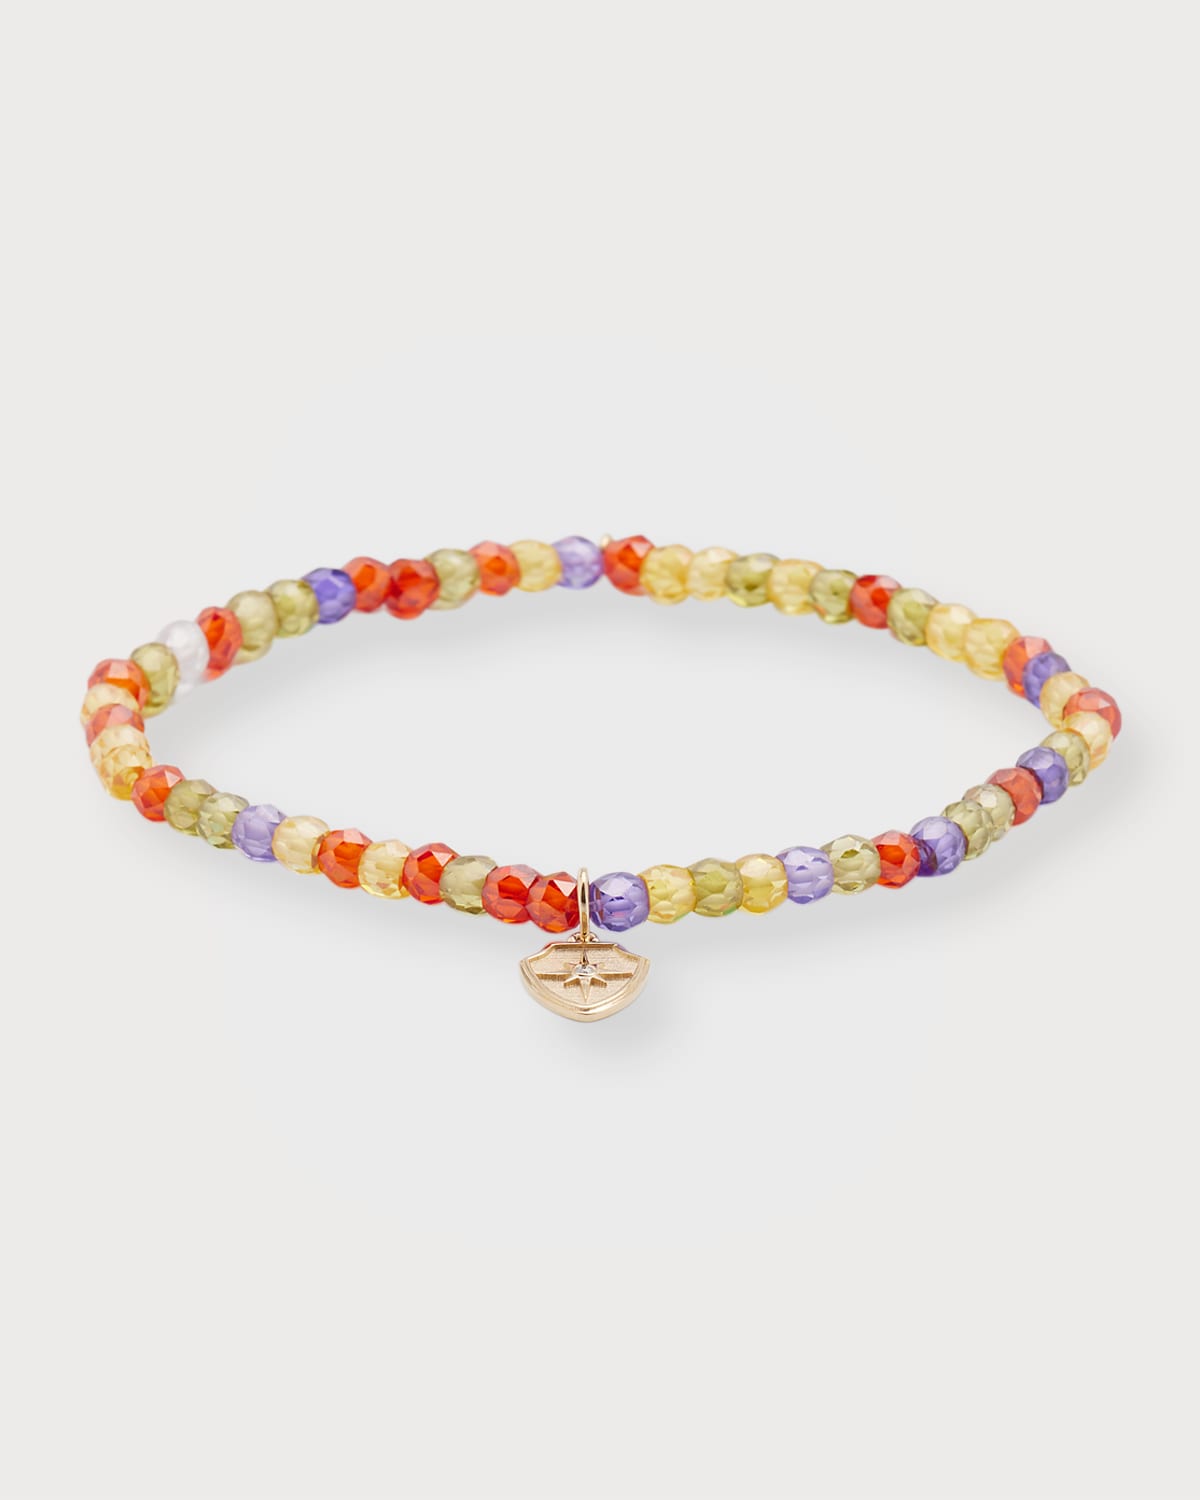 4mm Faceted Mutli-Colored Cubic Zirconia Rondelle Bracelet With Starburst Crest Charm